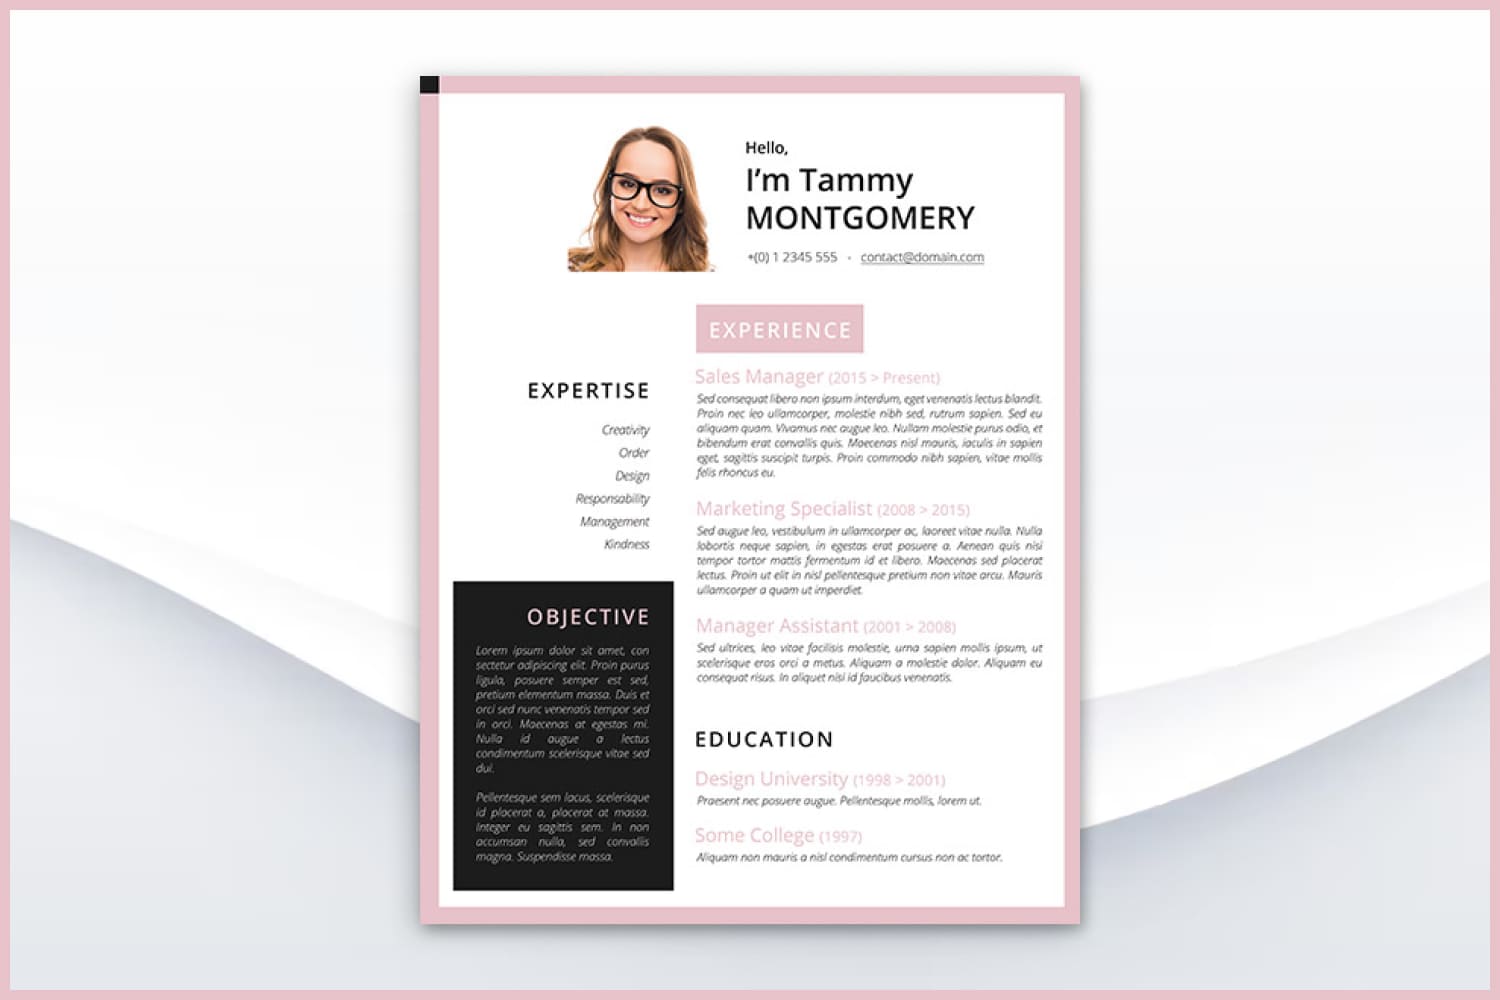 Resume with contacts, profile, experience and education with black square and pink accents.